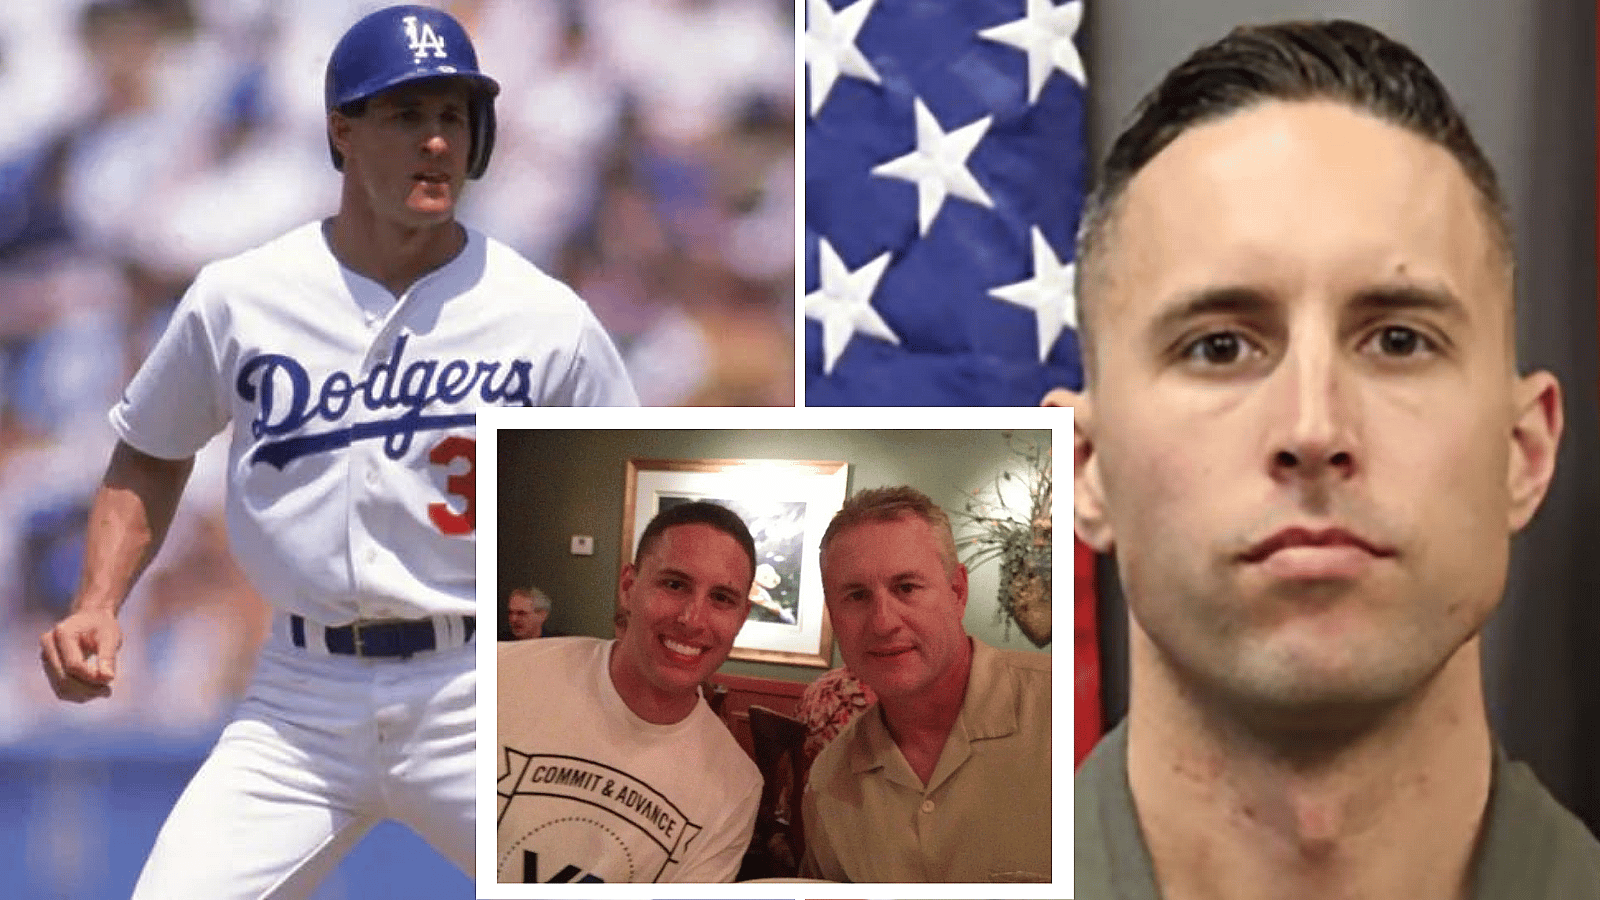 Son Of Dodgers Great Steve Sax Among Marines Killed In Crash